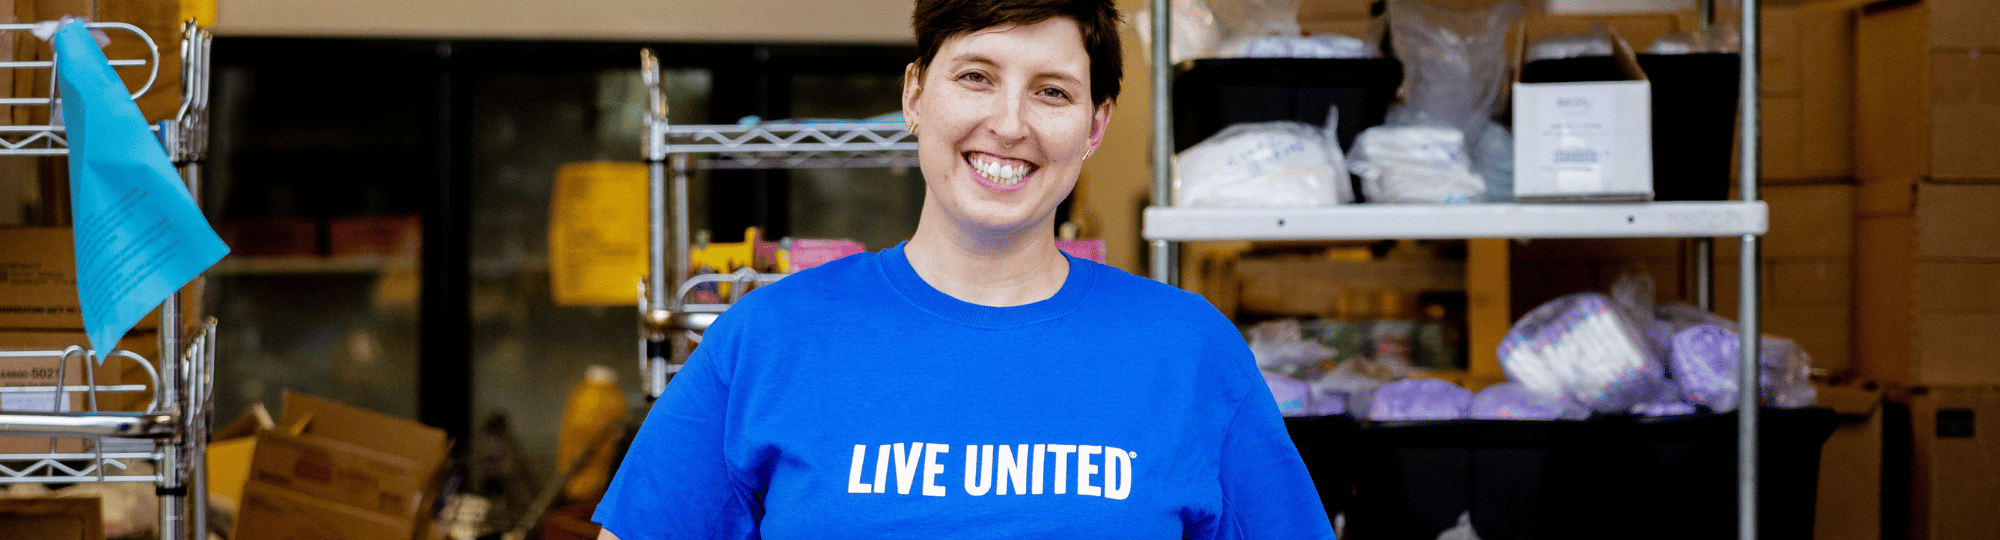 Person wearing blue LIVE UNITED tee shirt